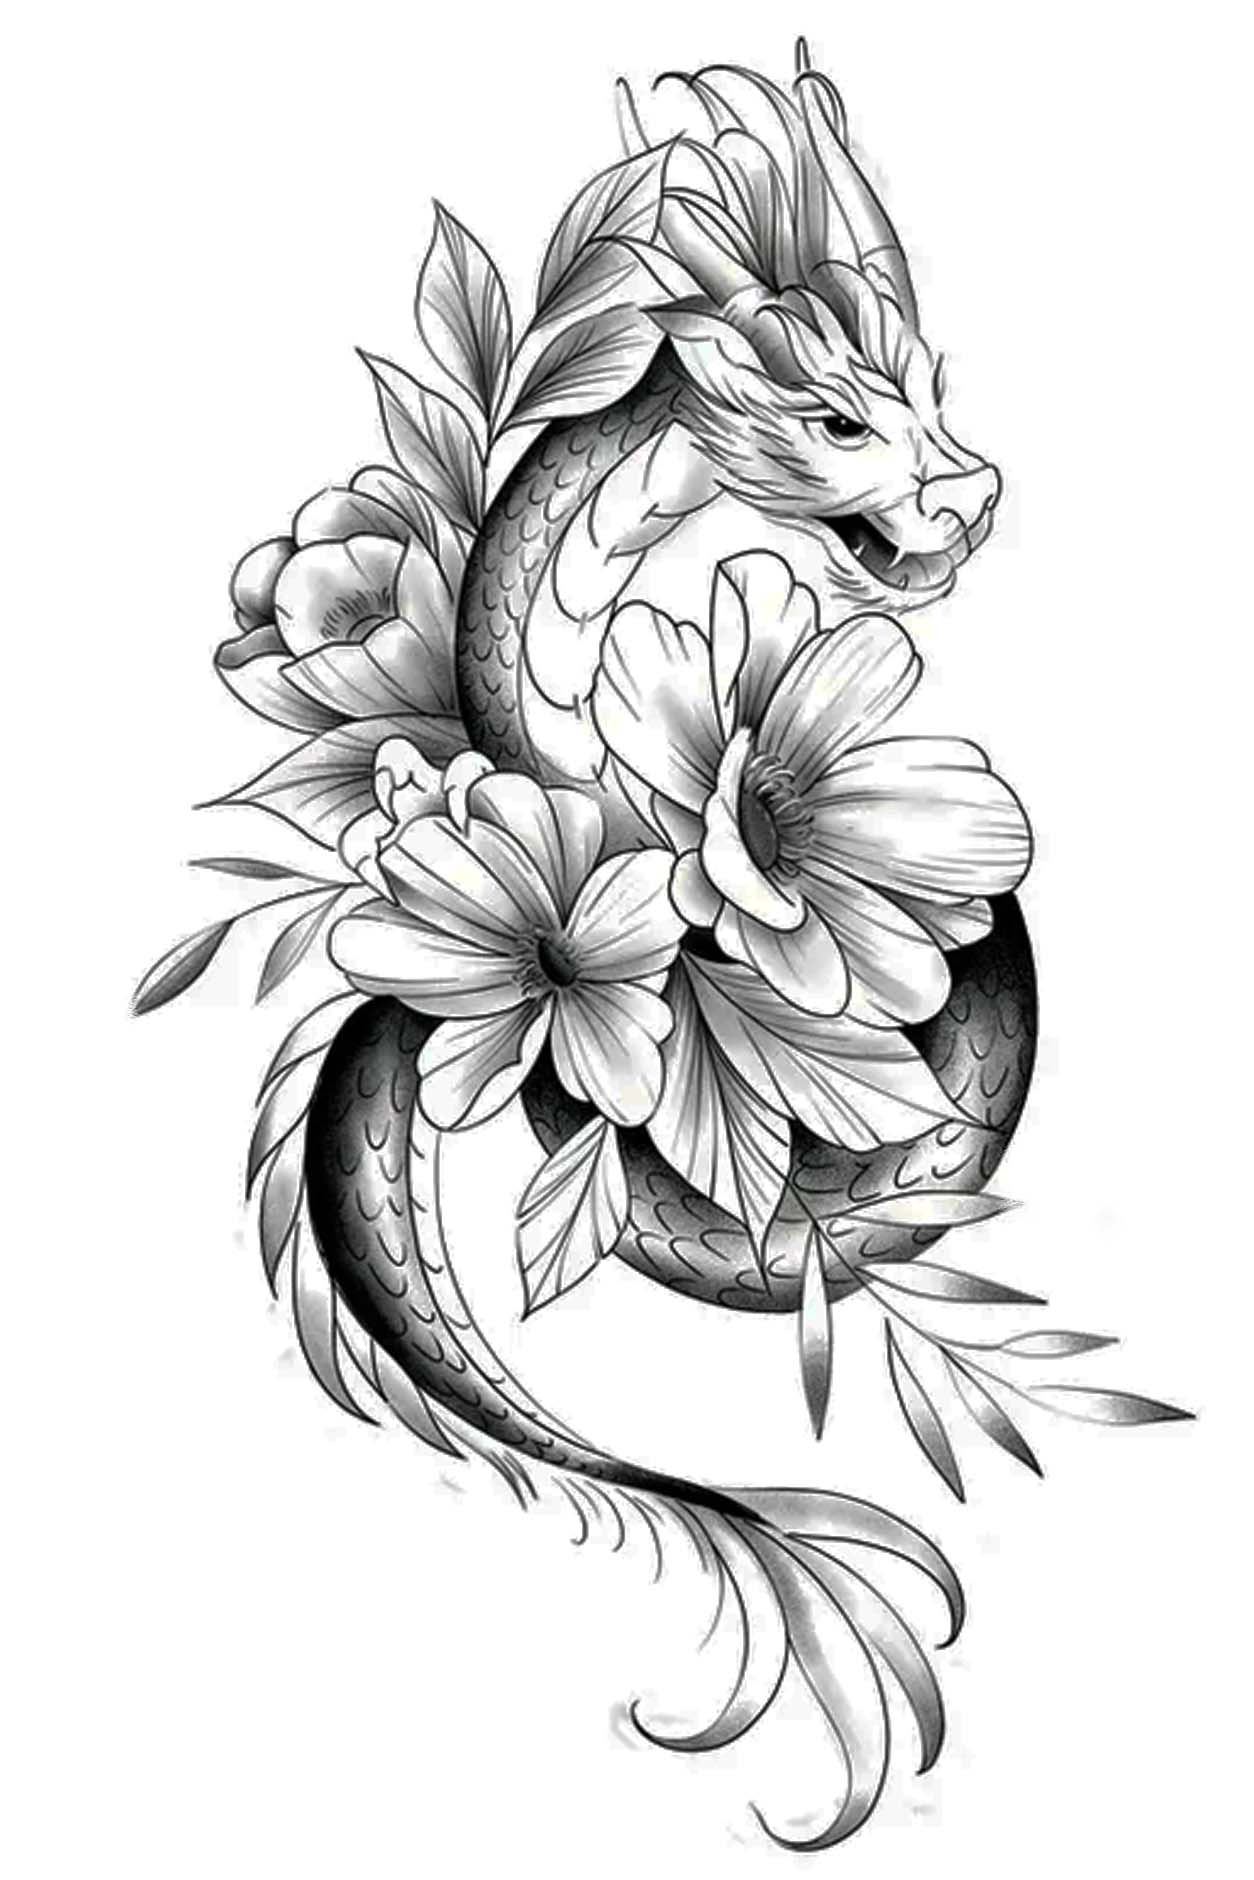 This fierce but happy dragon is hugging soft flowers. We learned from "Game of Thrones" that dragons are protective and loyal creatures. The contrast of blossoms with this dragon softens its spirit.